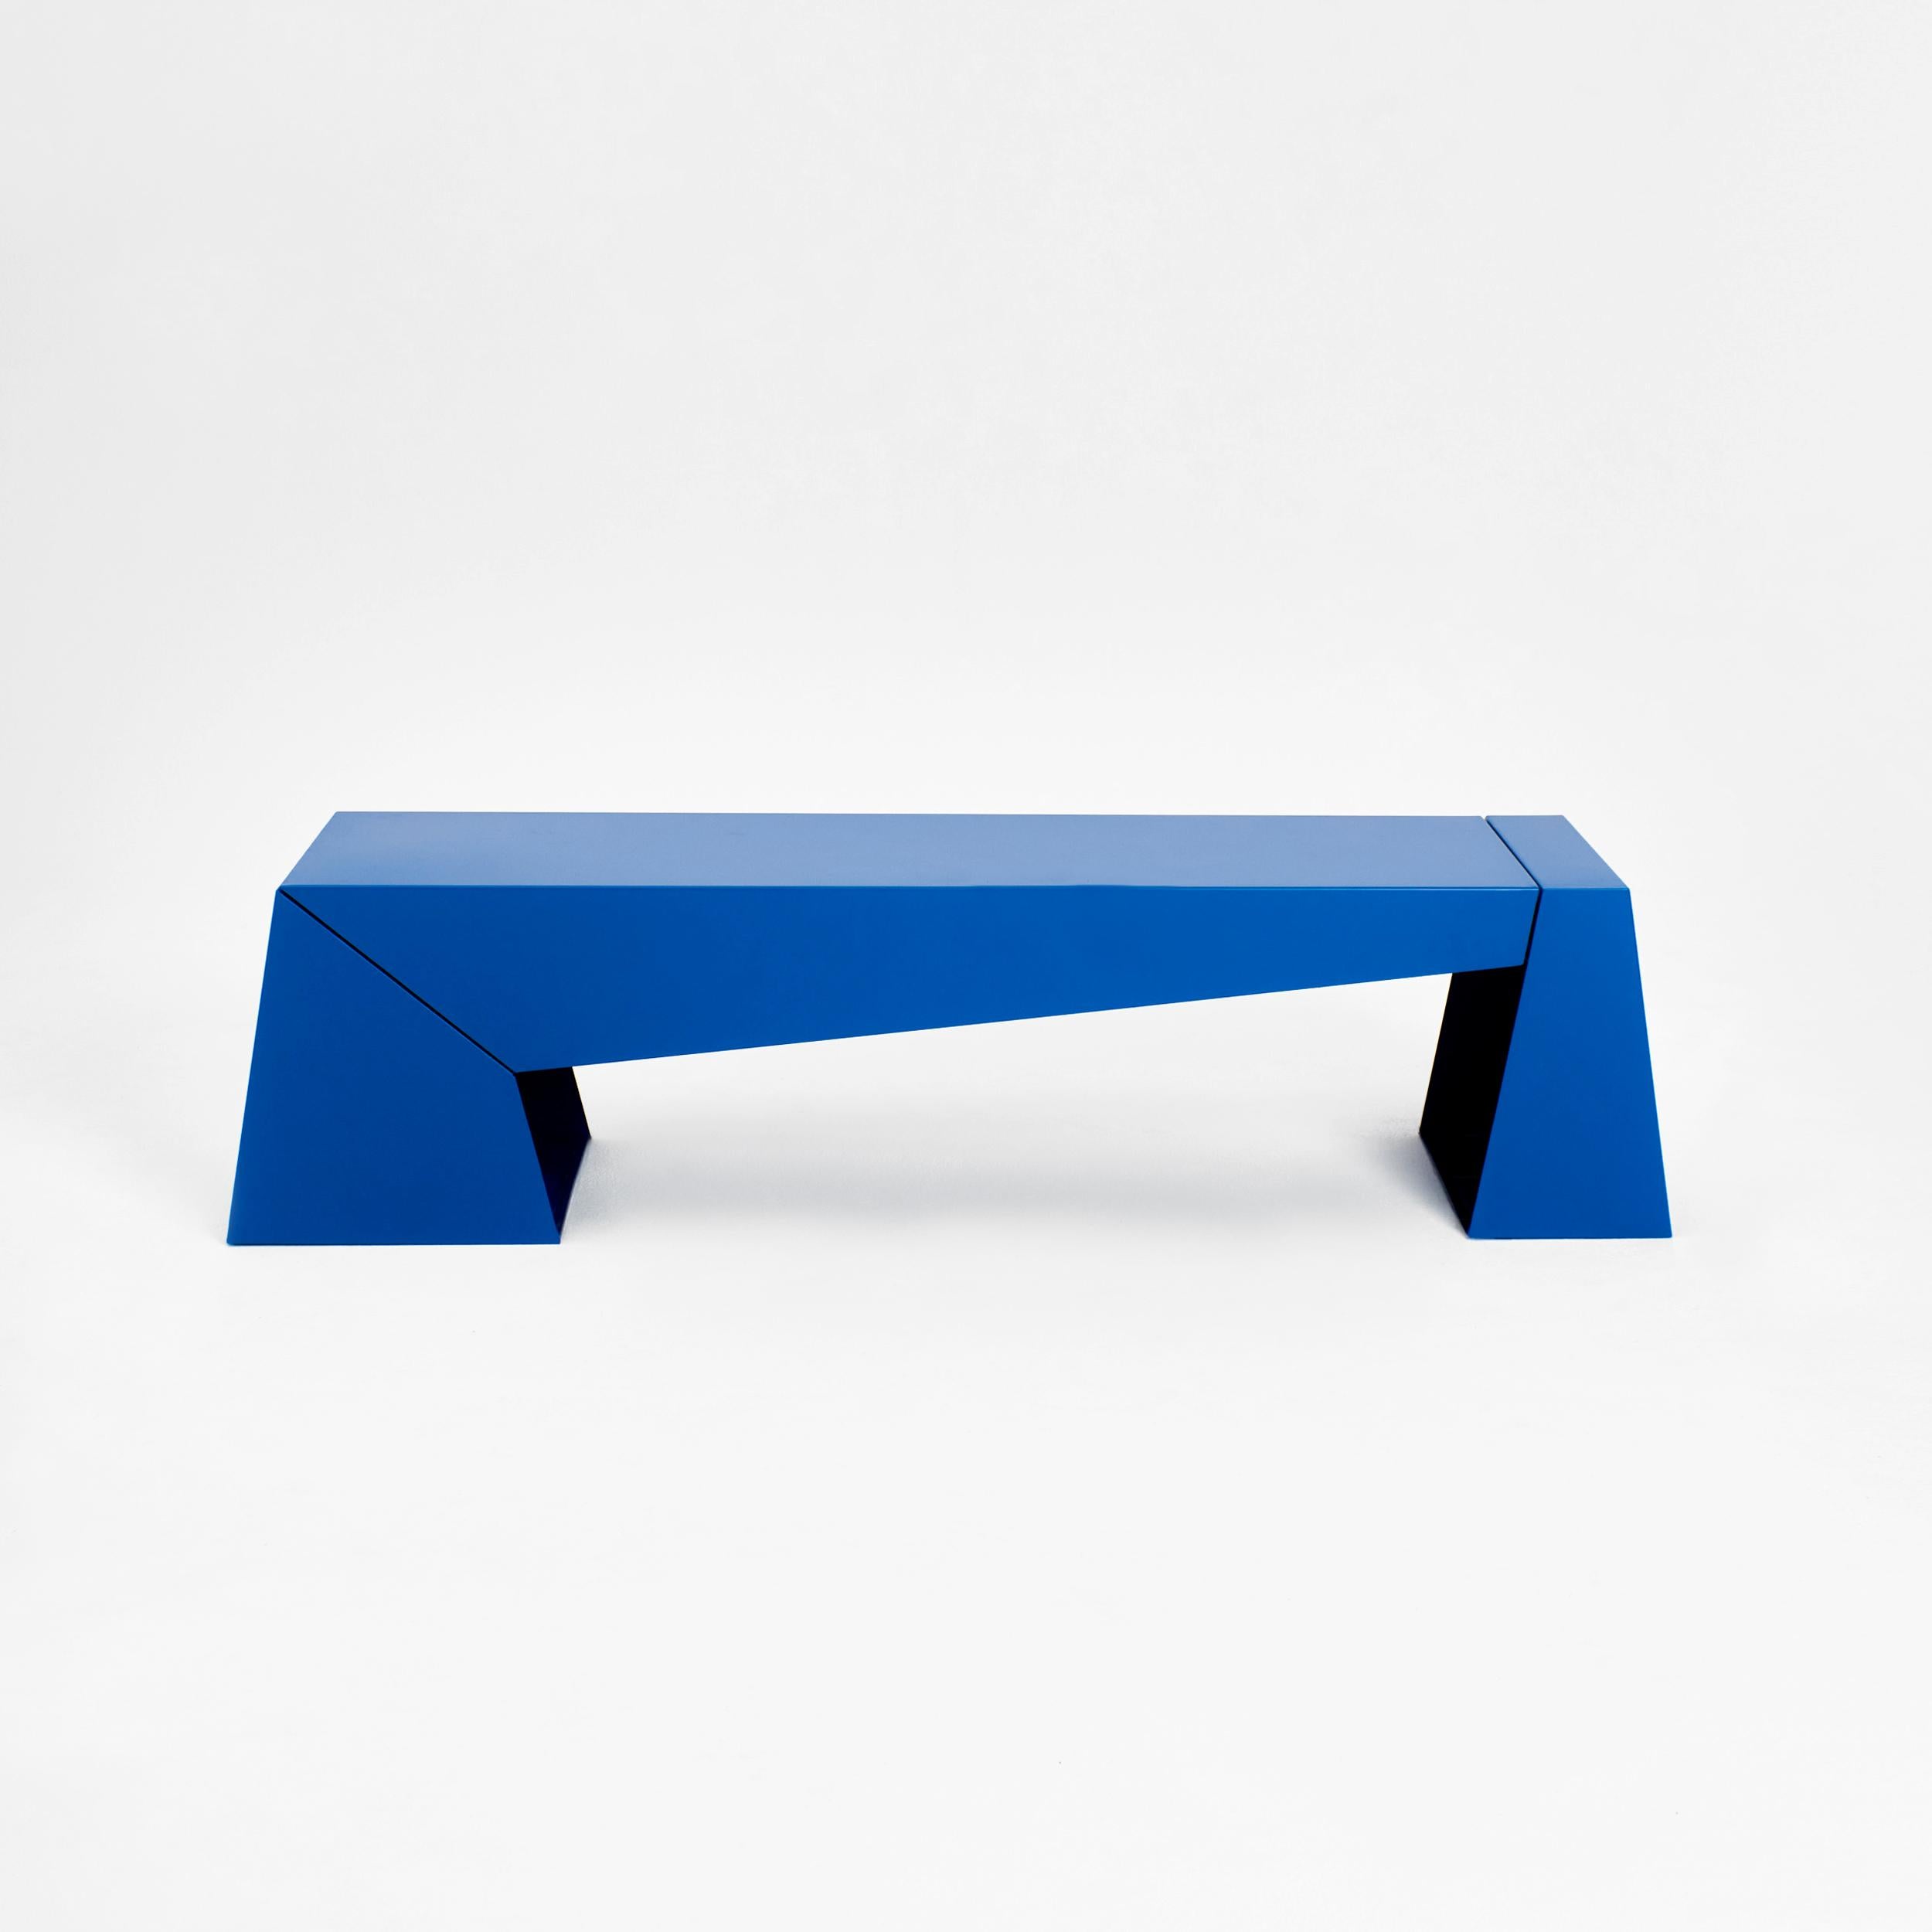 Indoor Folded Bench by Project 213A
Dimensions: D 45 x  W 178 x  H 44 cm
Materials: Metal. 

Three pieces of steel folded together and joined through metal elements, and powder coated. The asymmetric finish of the bench with small gaps between each